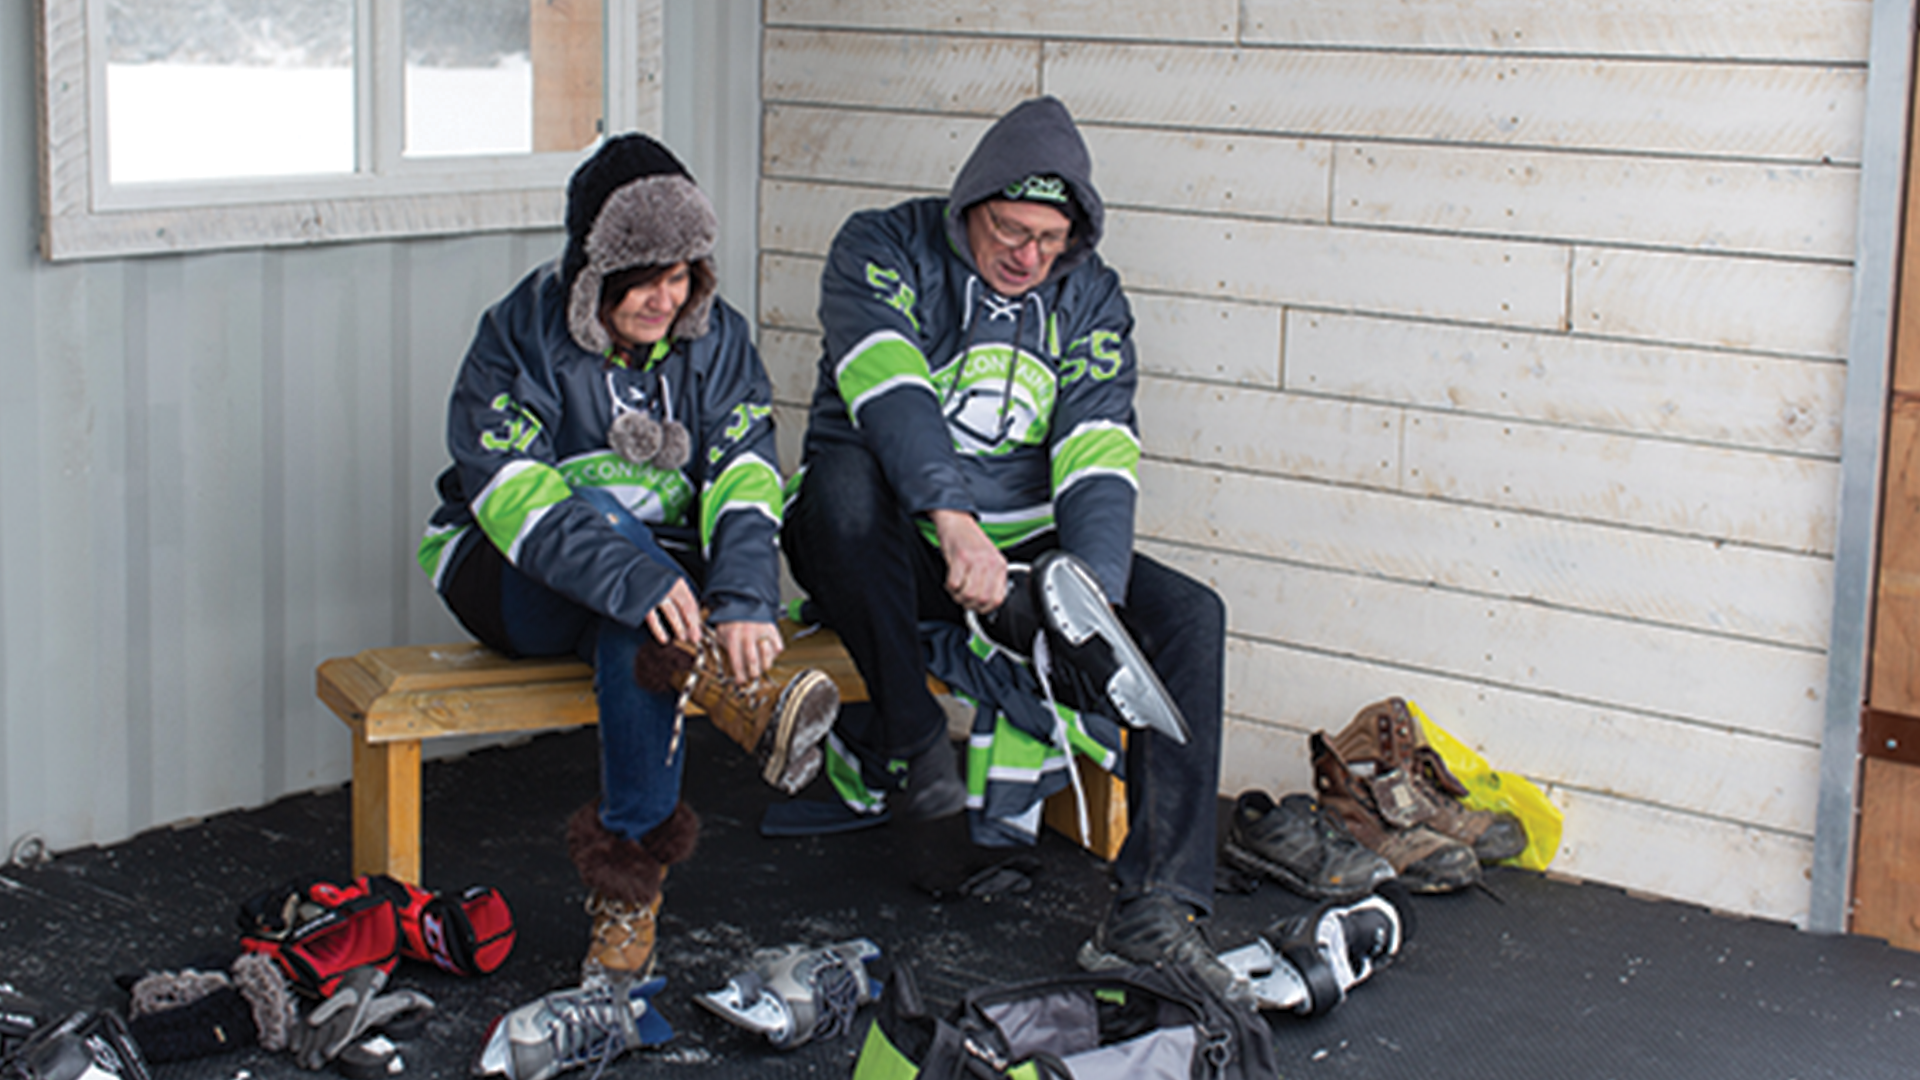 CNG containers members tying skates and boots on a bench